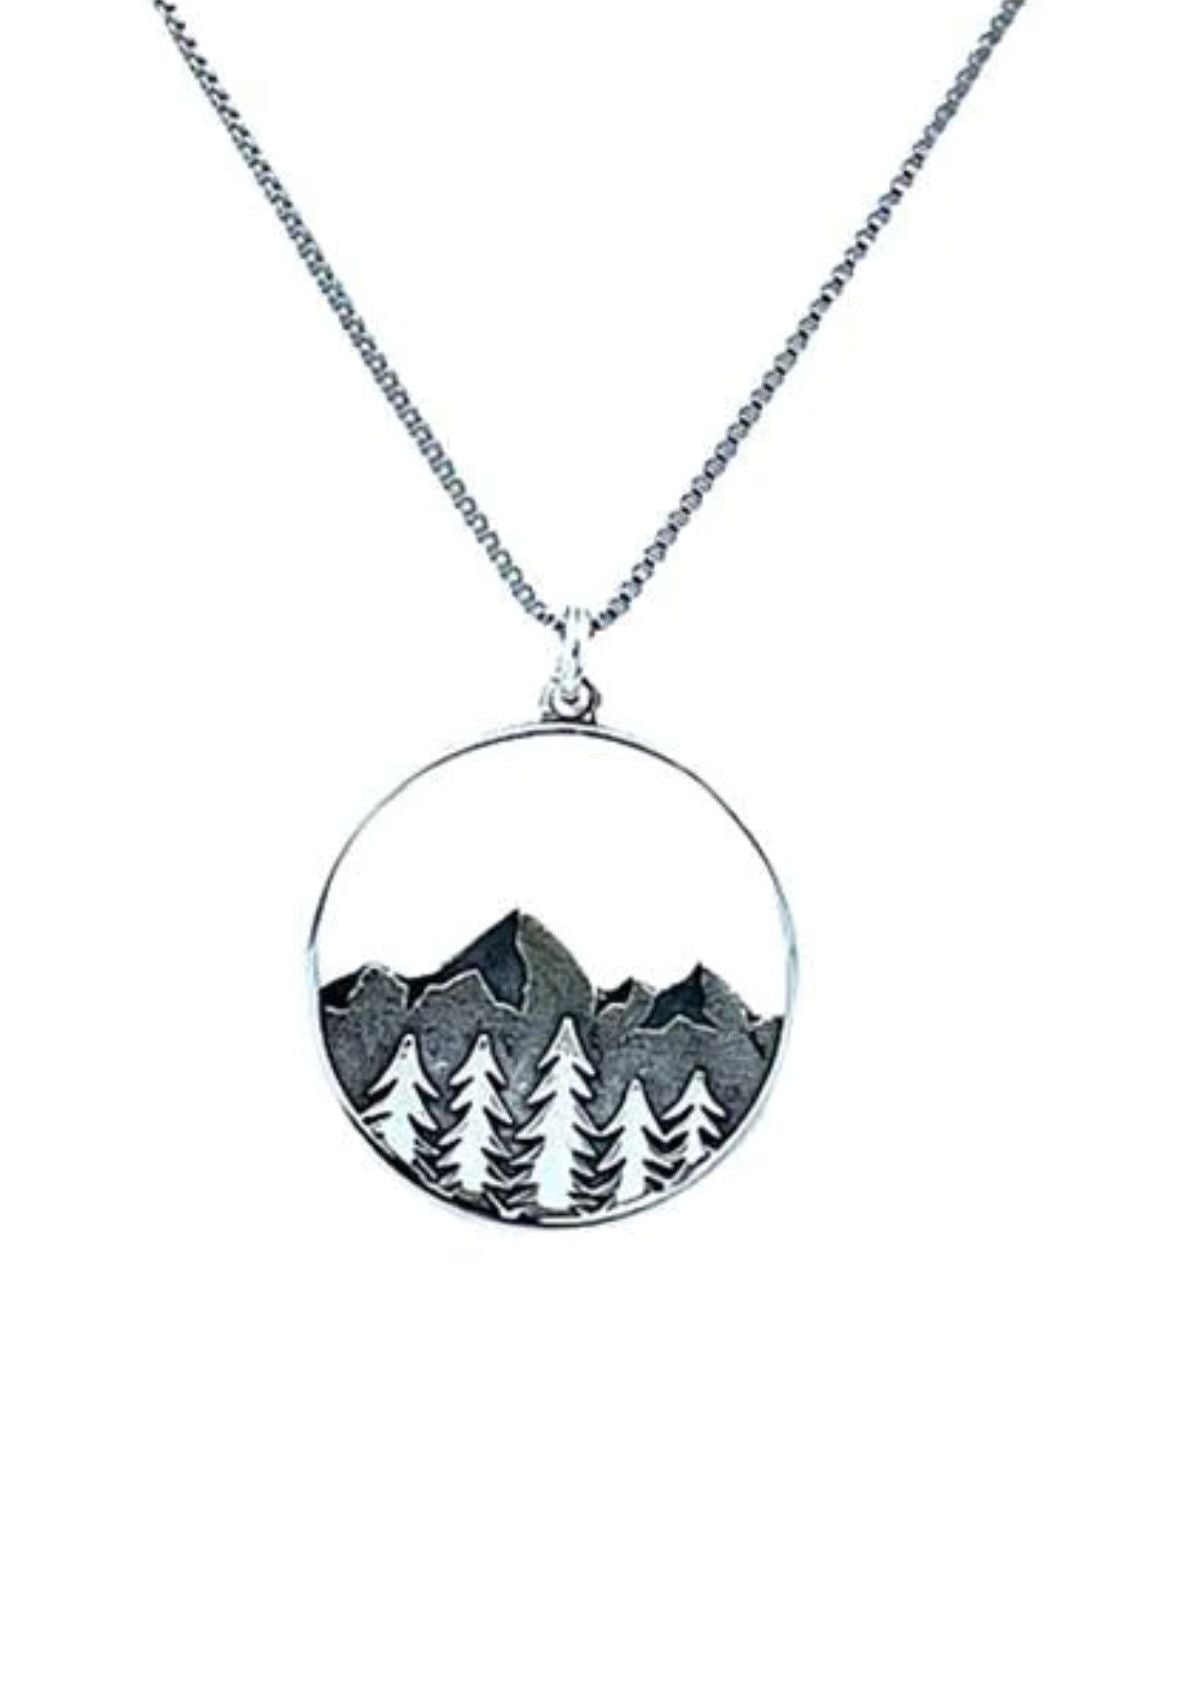 Fir Trees Mountain Sterling Silver Pendant Rhodium Plated Chain Necklace -Athena Designs- Ruby Jane-